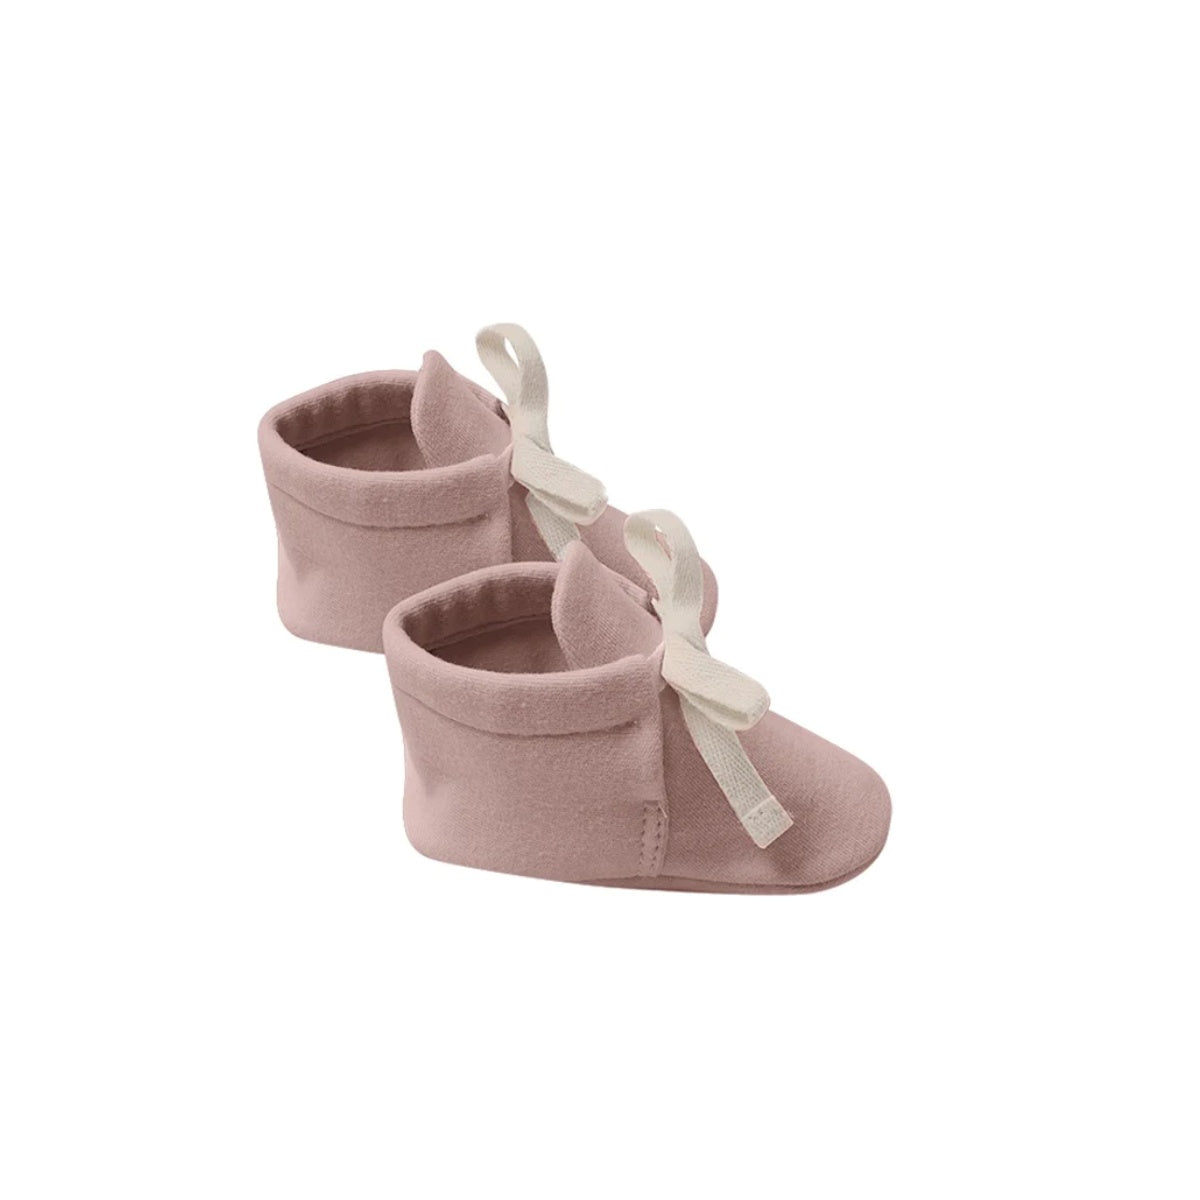 Baby booties - Lilac